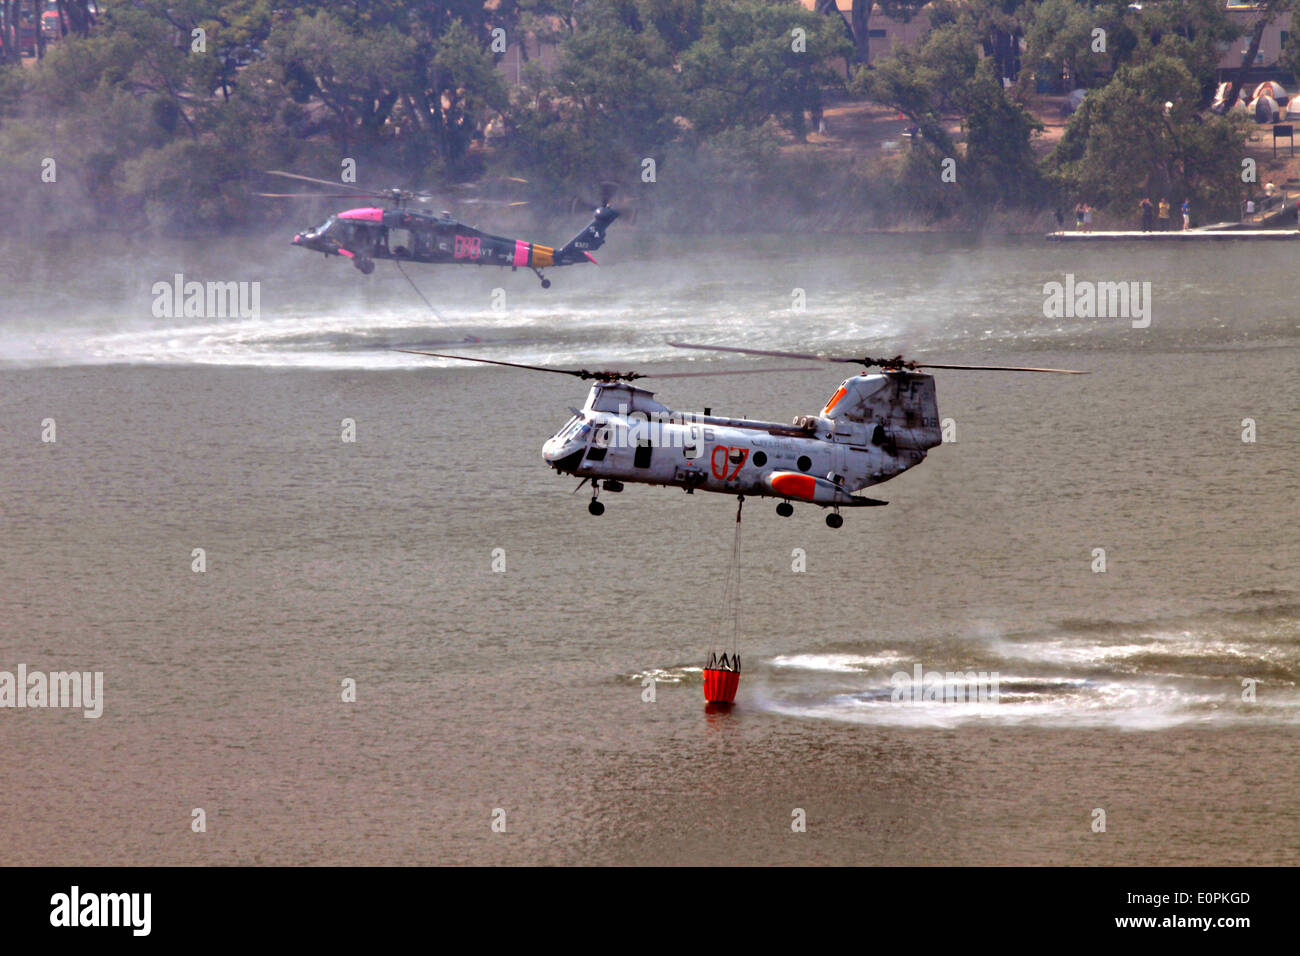 US Marine Corps helicopters load water using a Bambi bucket to help fight the Tomahawk and Las Pulgas wildfires as they burn the foothills May 16, 2014 around Camp Pendleton, California.  Evacuations forced more than 13,000 people from their homes as the fire burned across San Diego County. Stock Photo